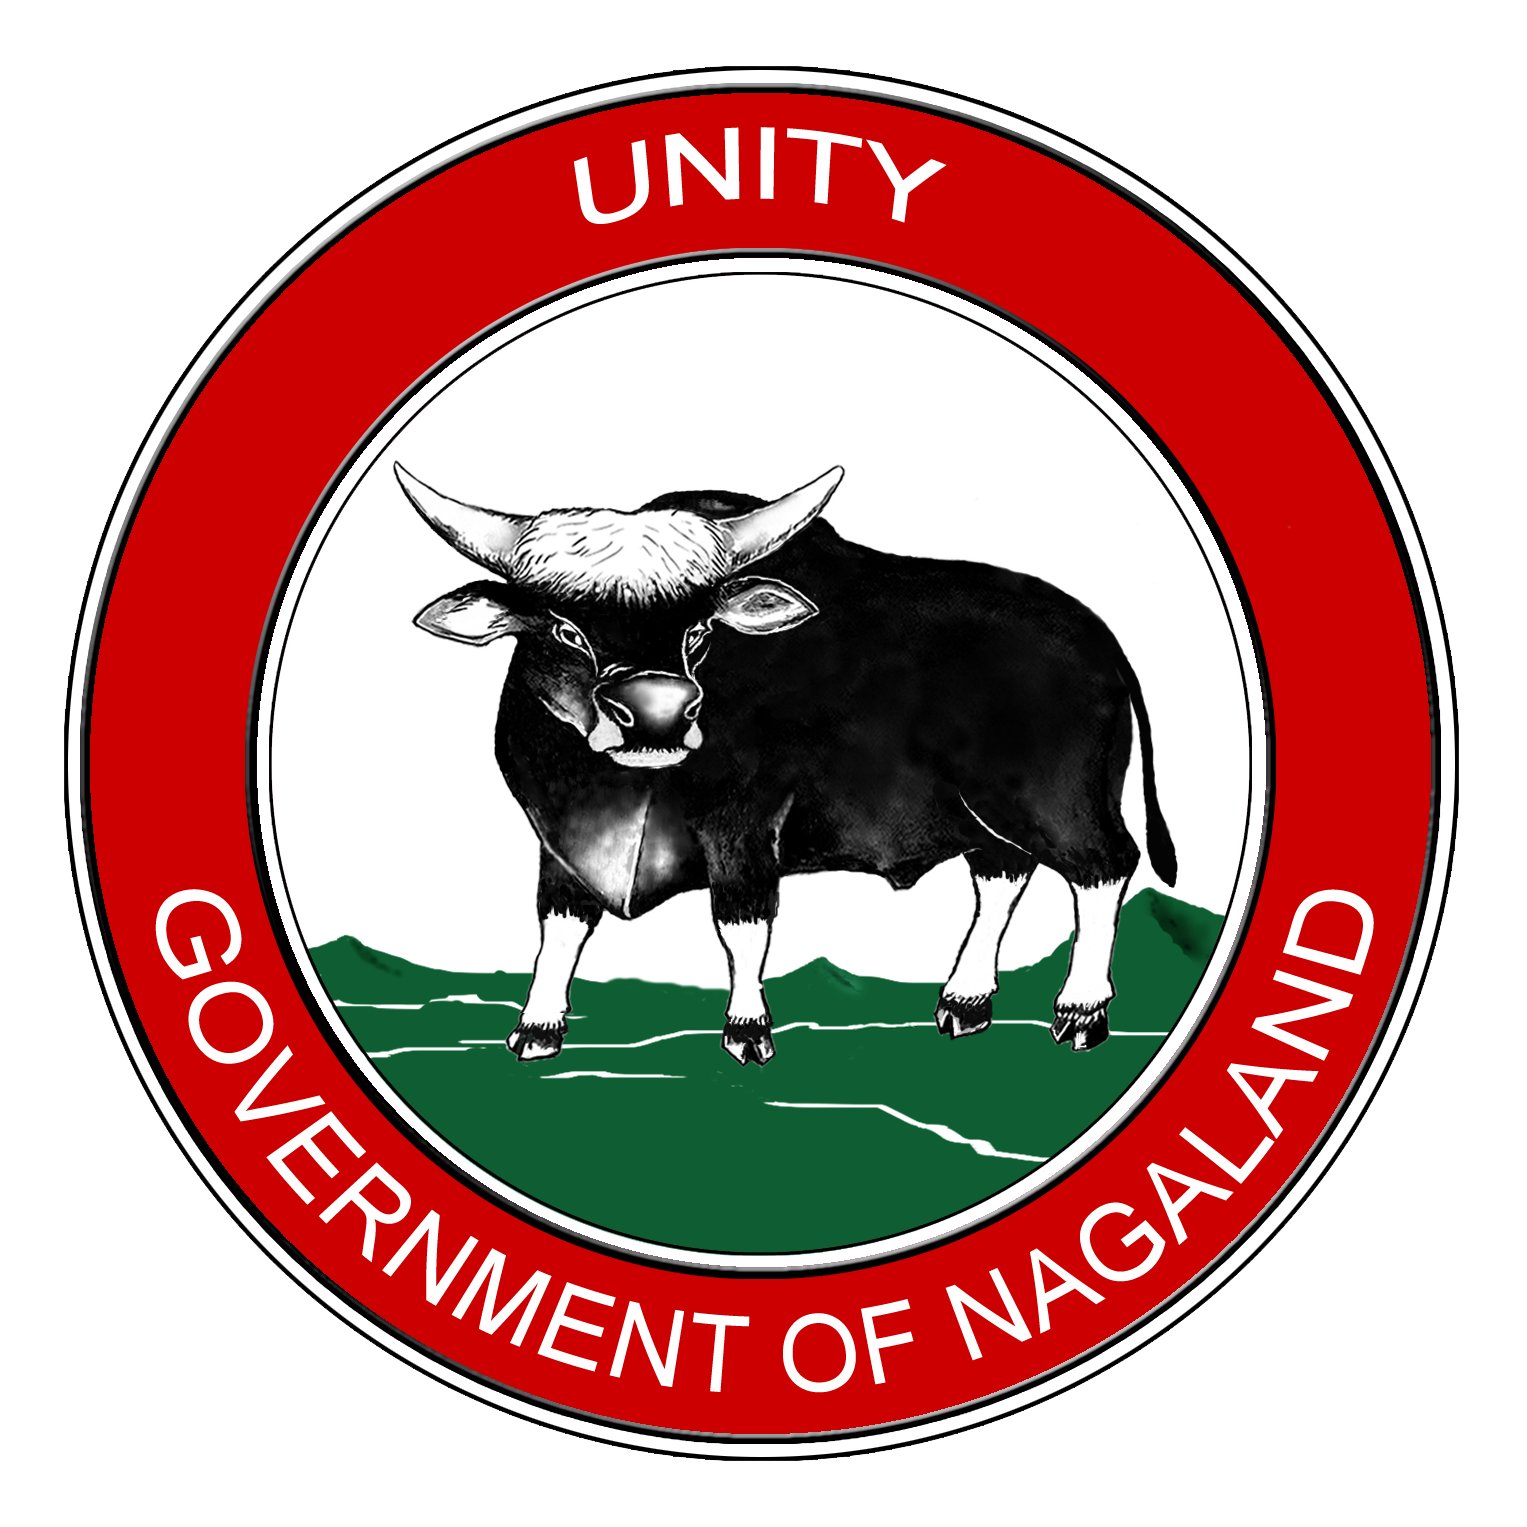 Official twitter account of Directorate of Technical Education, Government of Nagaland.